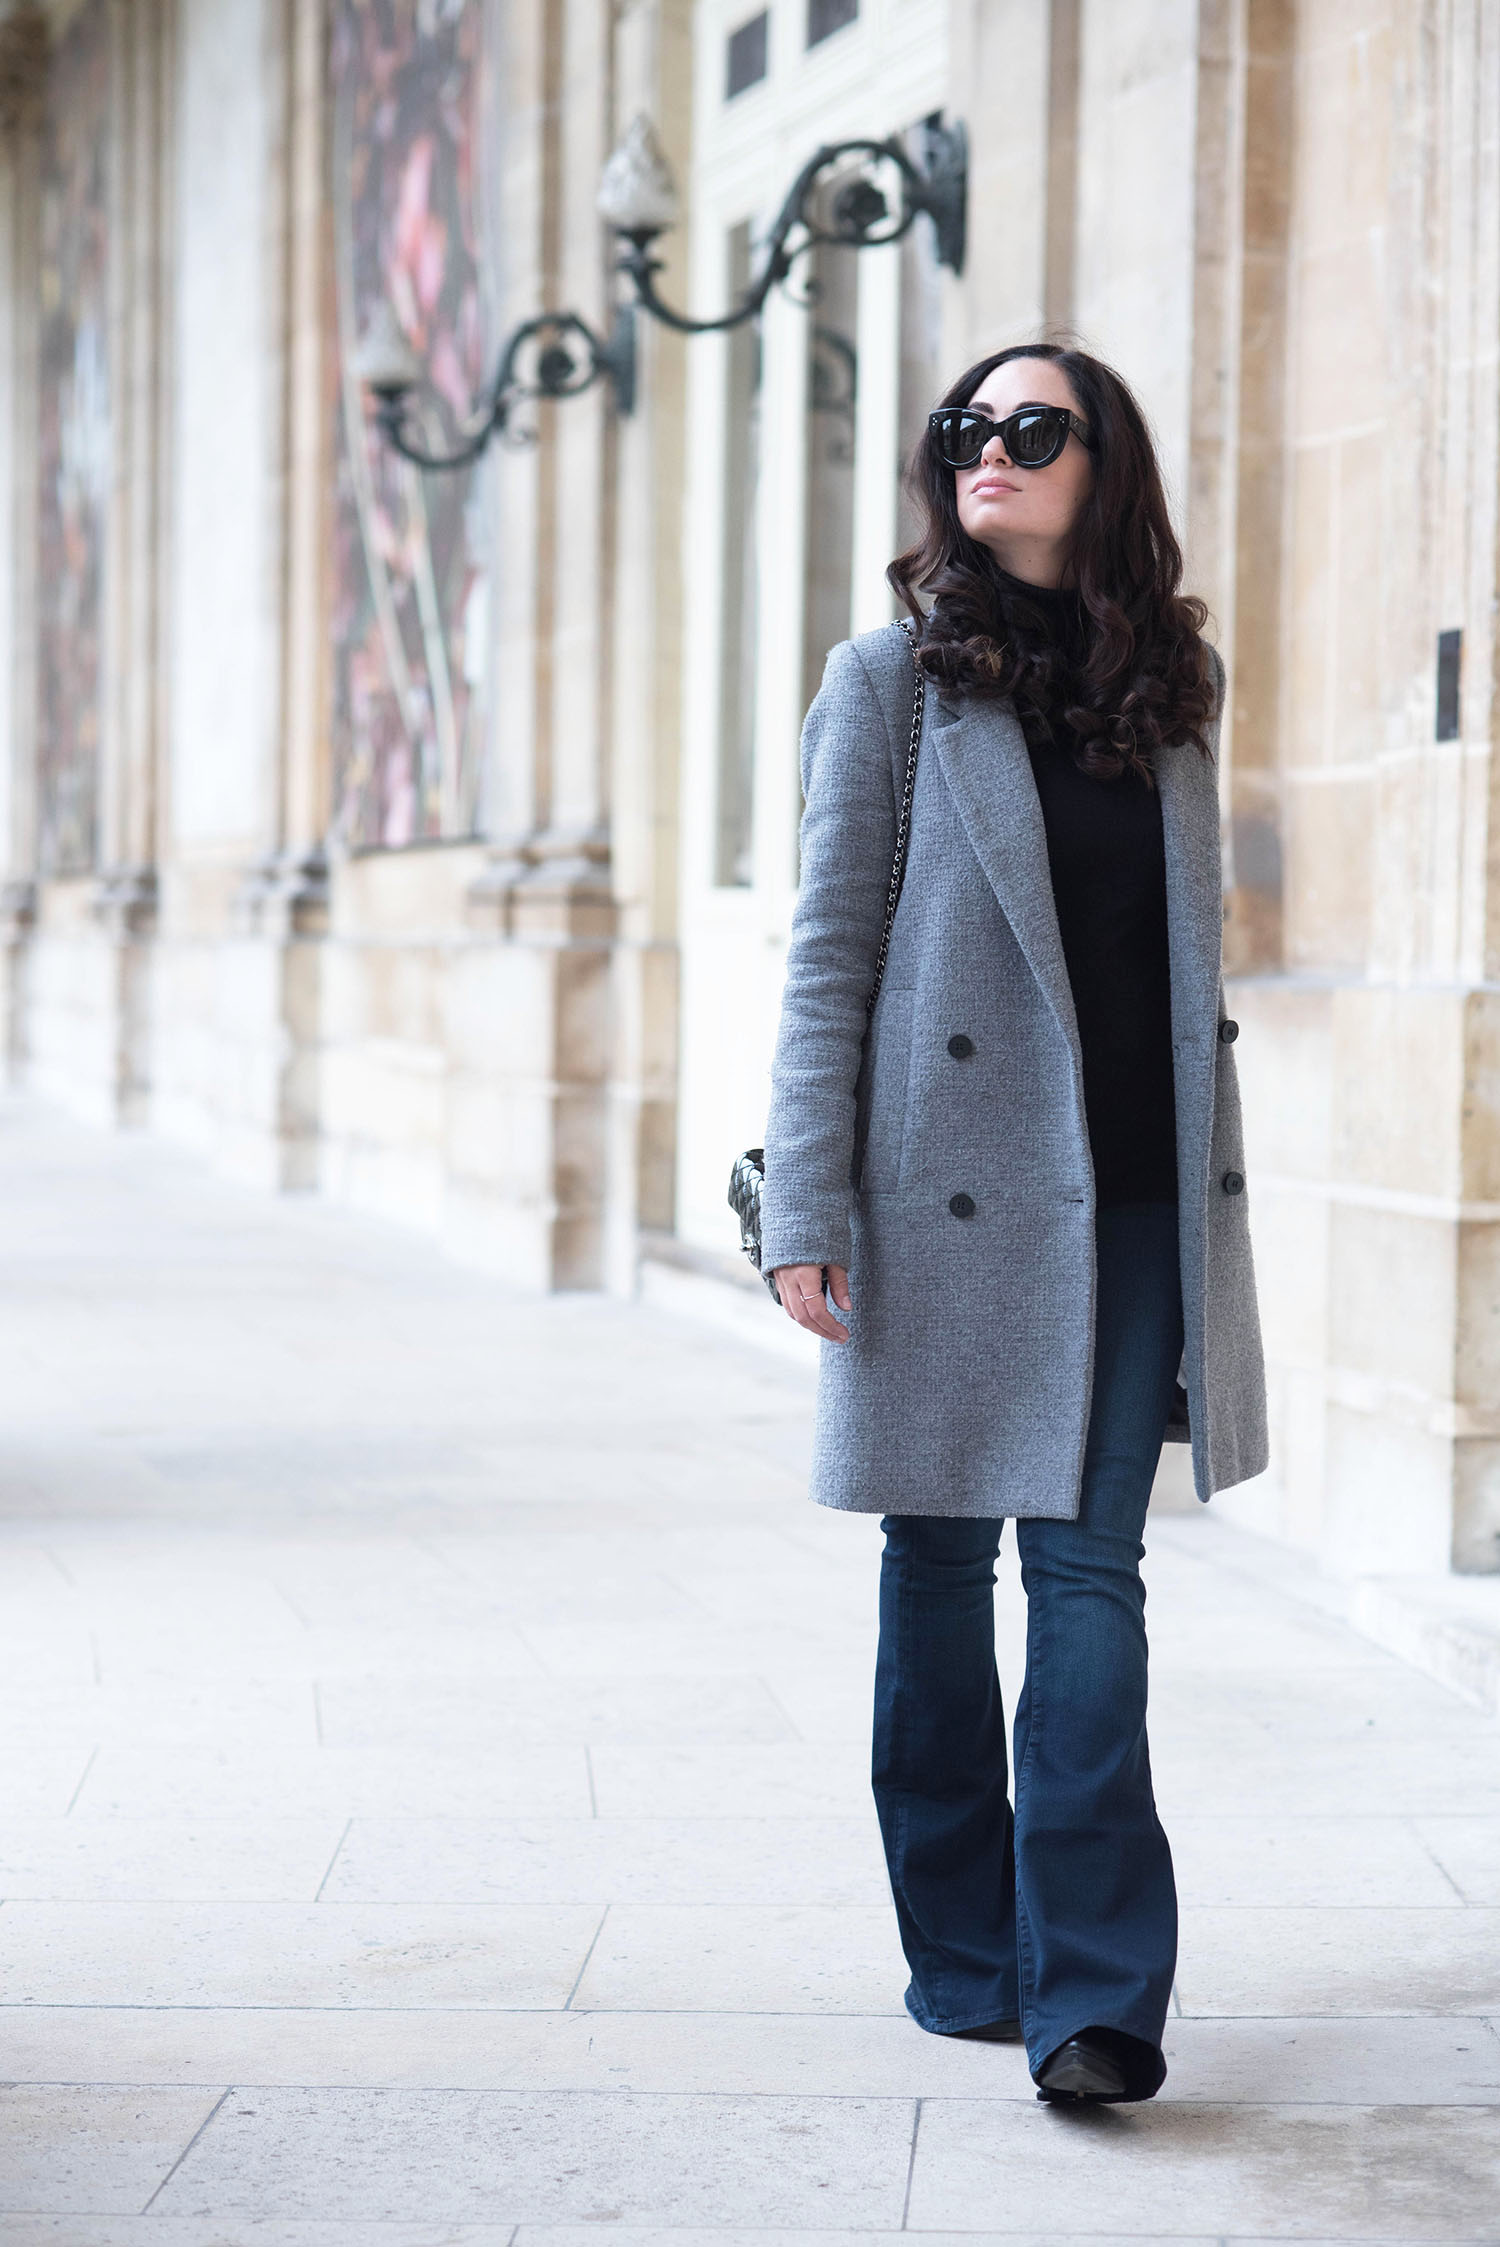 Canadian fashion blogger Cee Fardoe of Coco & Vera at the Archives Nationales in Paris wearing Mavi flared jeans and a Zara grey coat